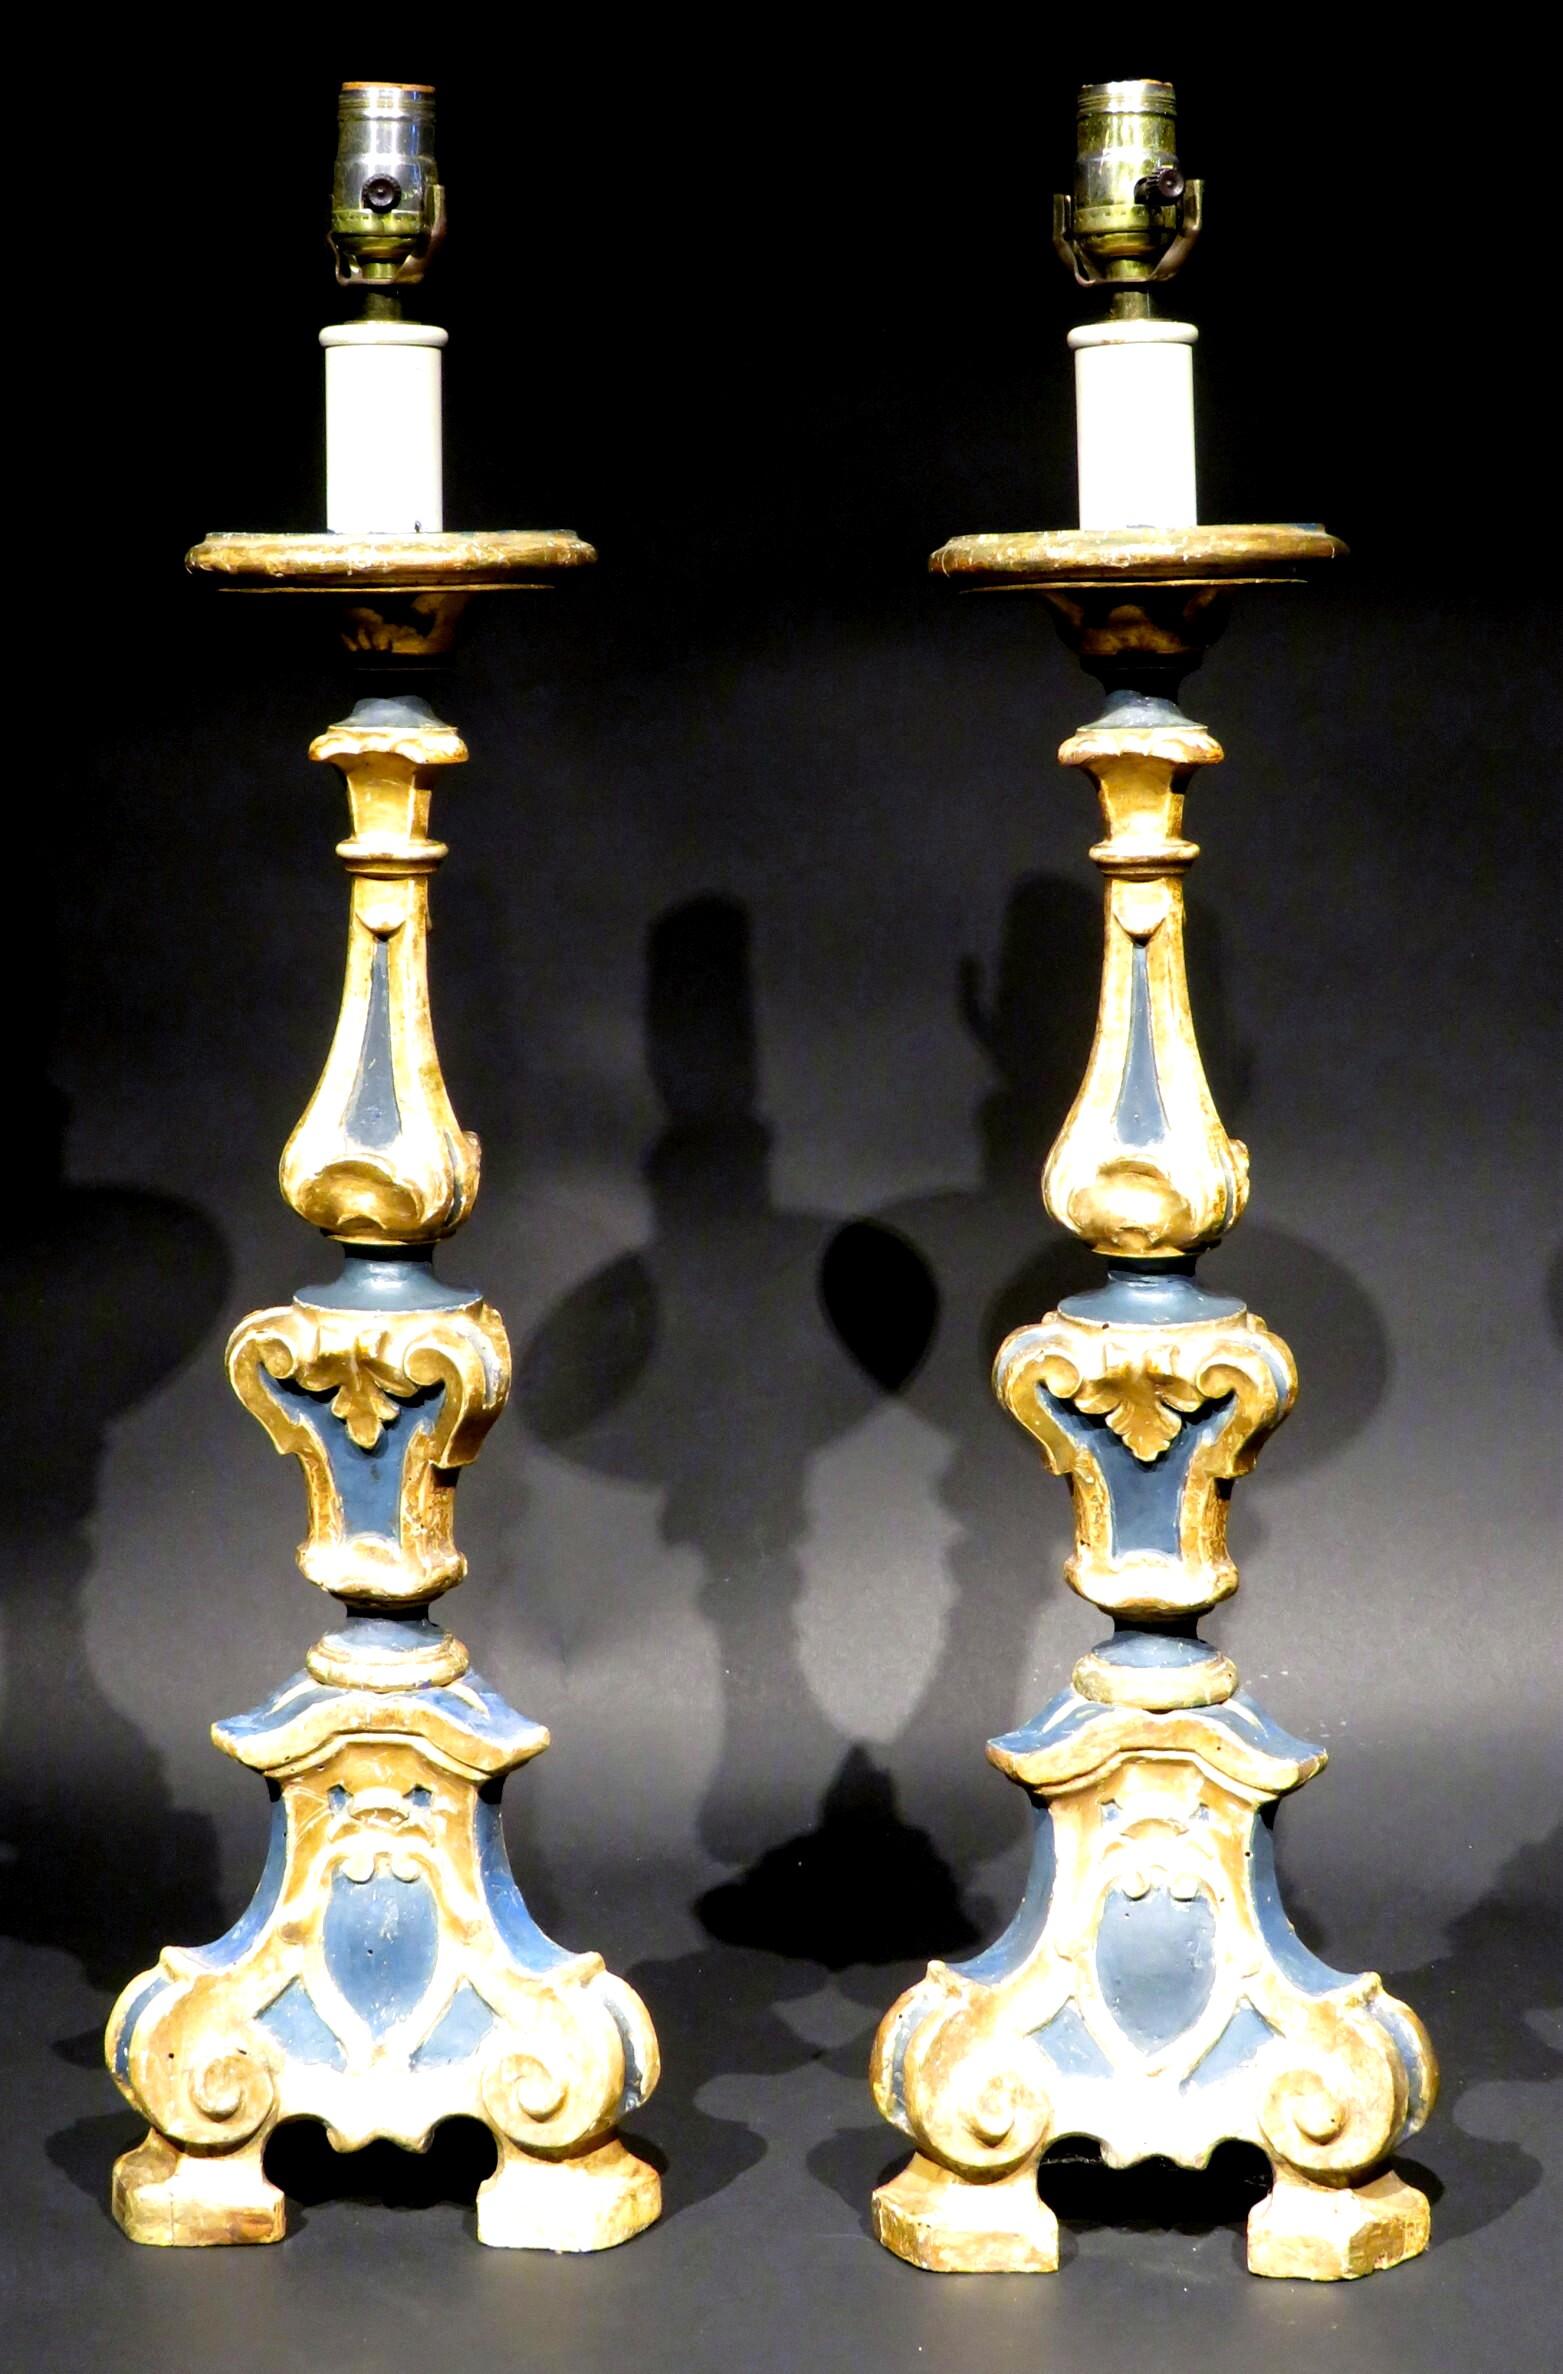 Pair of 19th Century Baroque Style Pricket Table Lamps, Italian Circa 1890 In Good Condition For Sale In Ottawa, Ontario